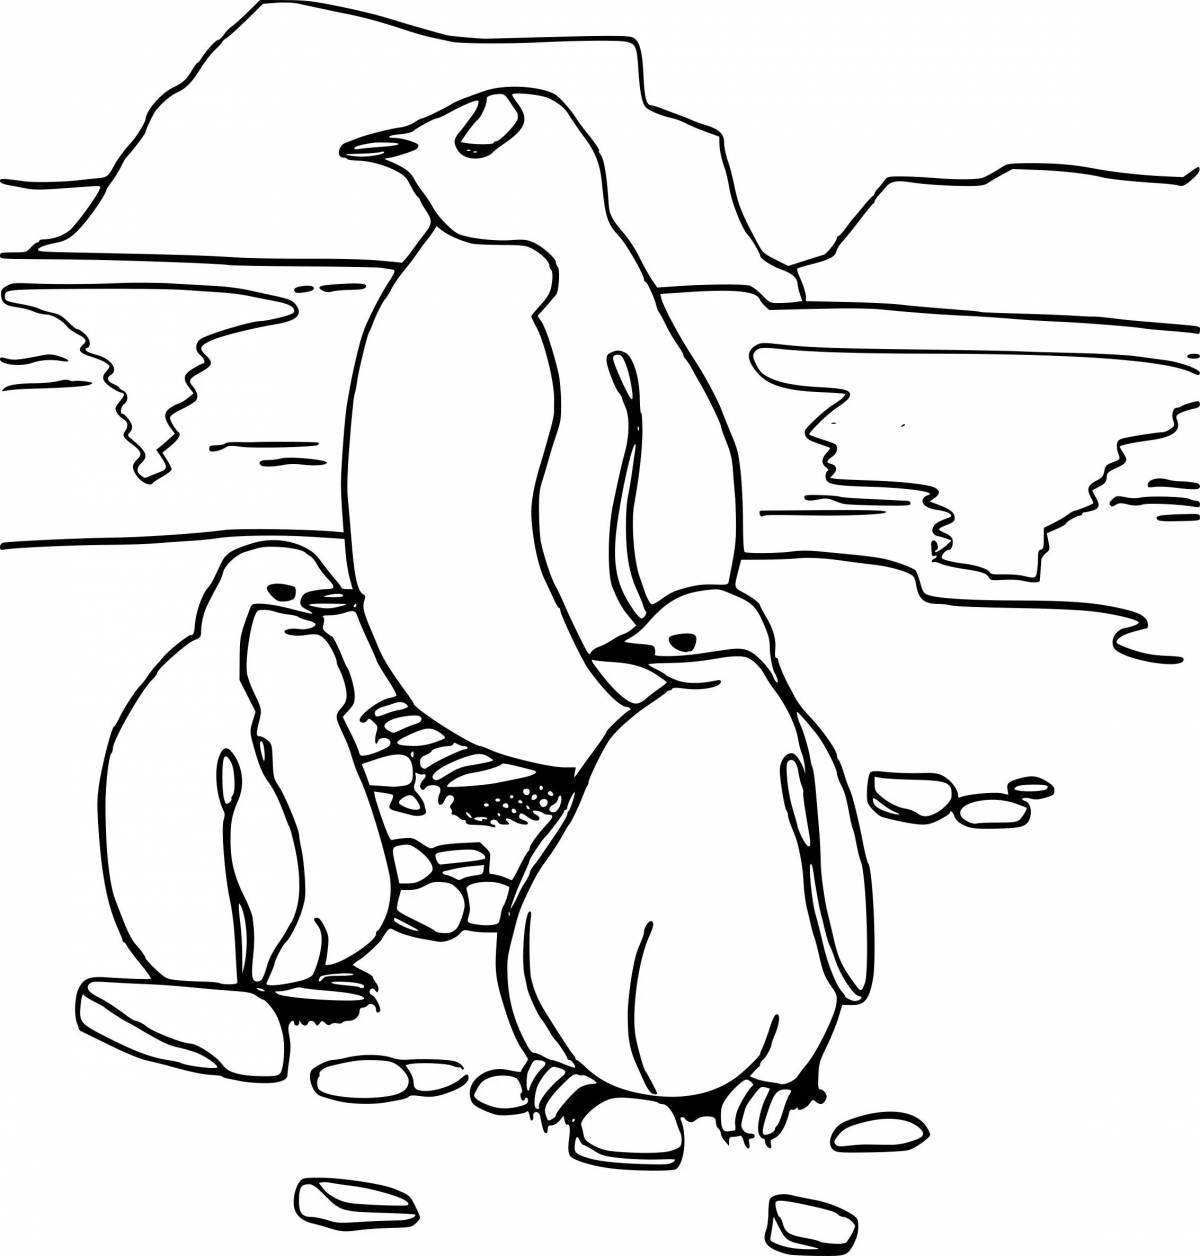 Adorable penguin on an ice floe coloring pages for kids